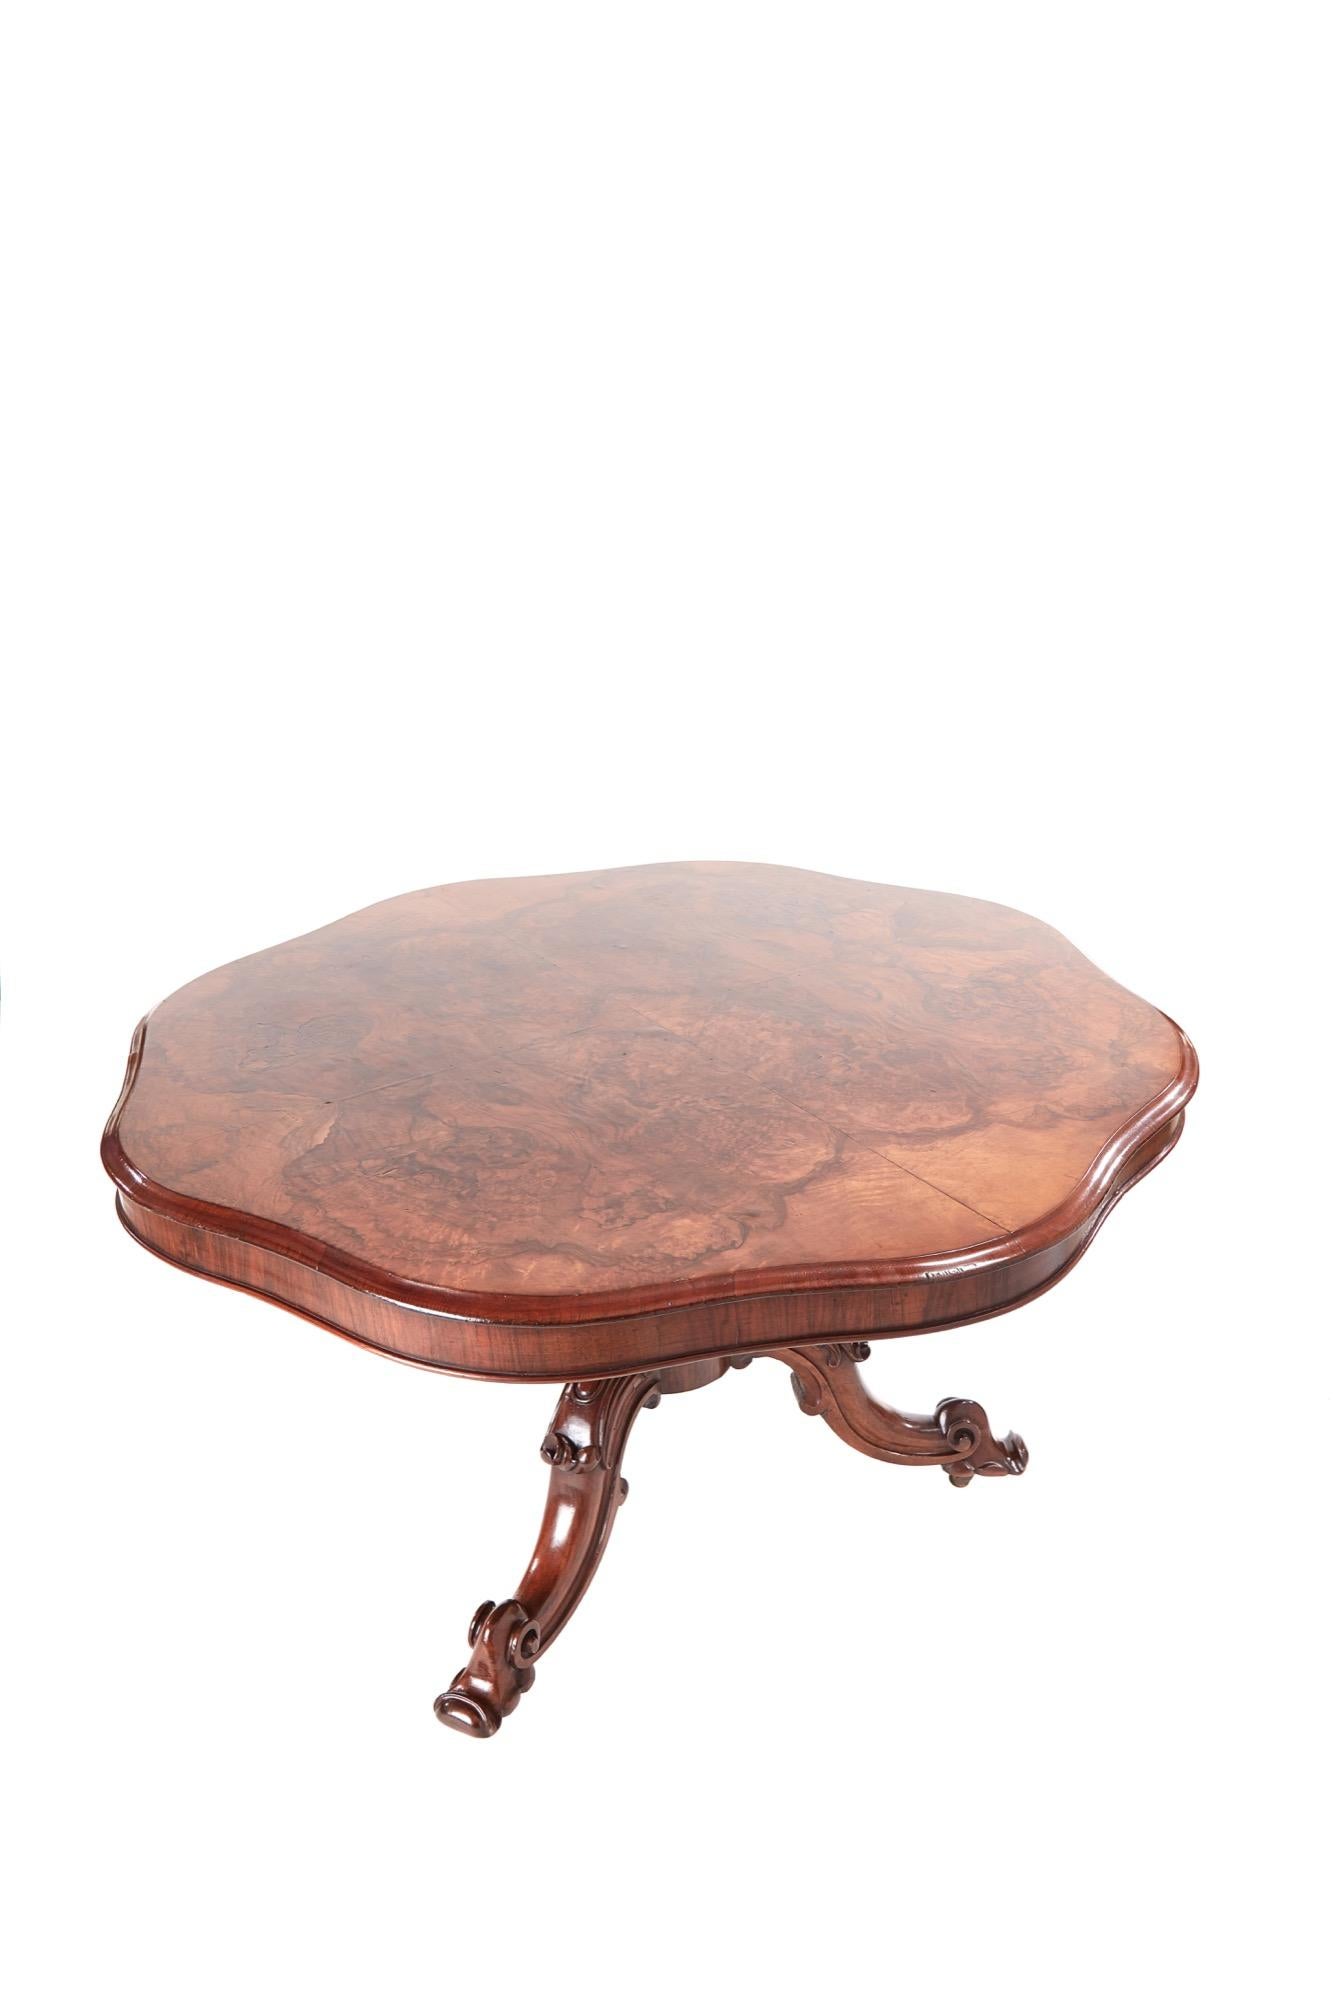 Finest quality antique Victorian burr walnut shaped centre table with a tilt-top having exceptional matched burr walnut veneers. It has a thumb moulded edge and a solid walnut base with a shaped reeded centre column. It is supported by three shaped